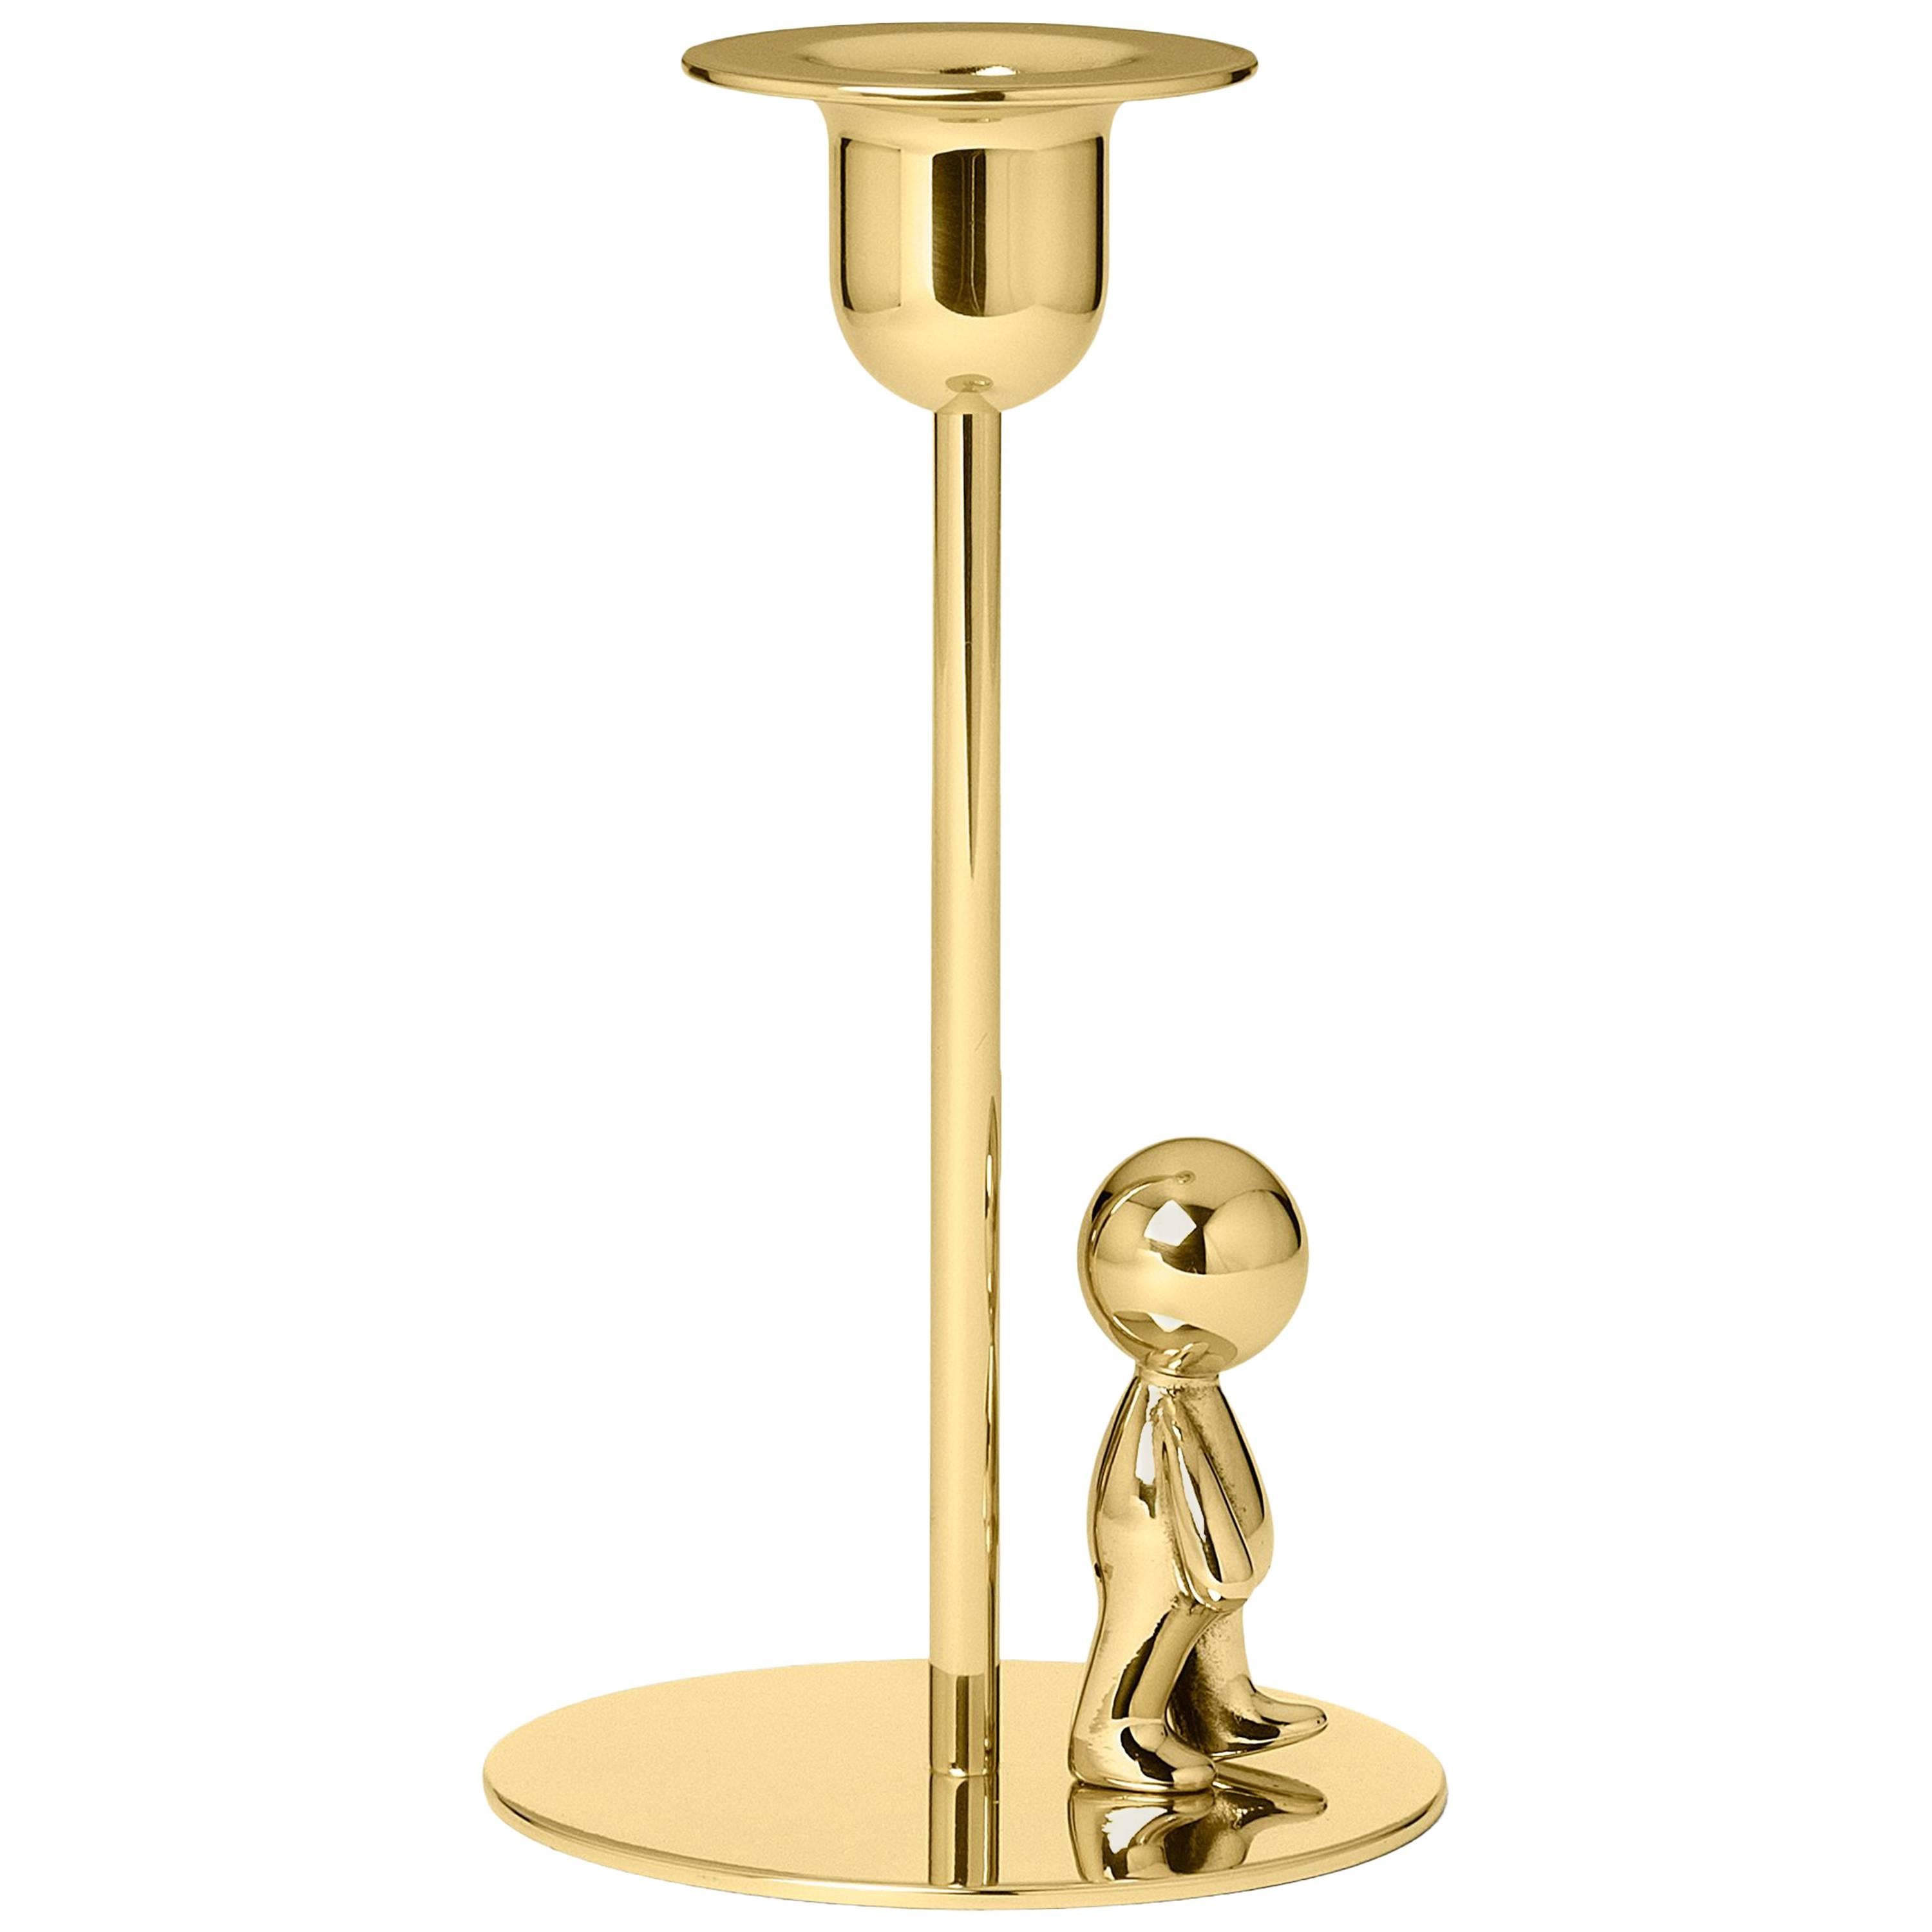 Ghidini 1961 Omini the Walkman Short Candlestick in Polished Brass For Sale